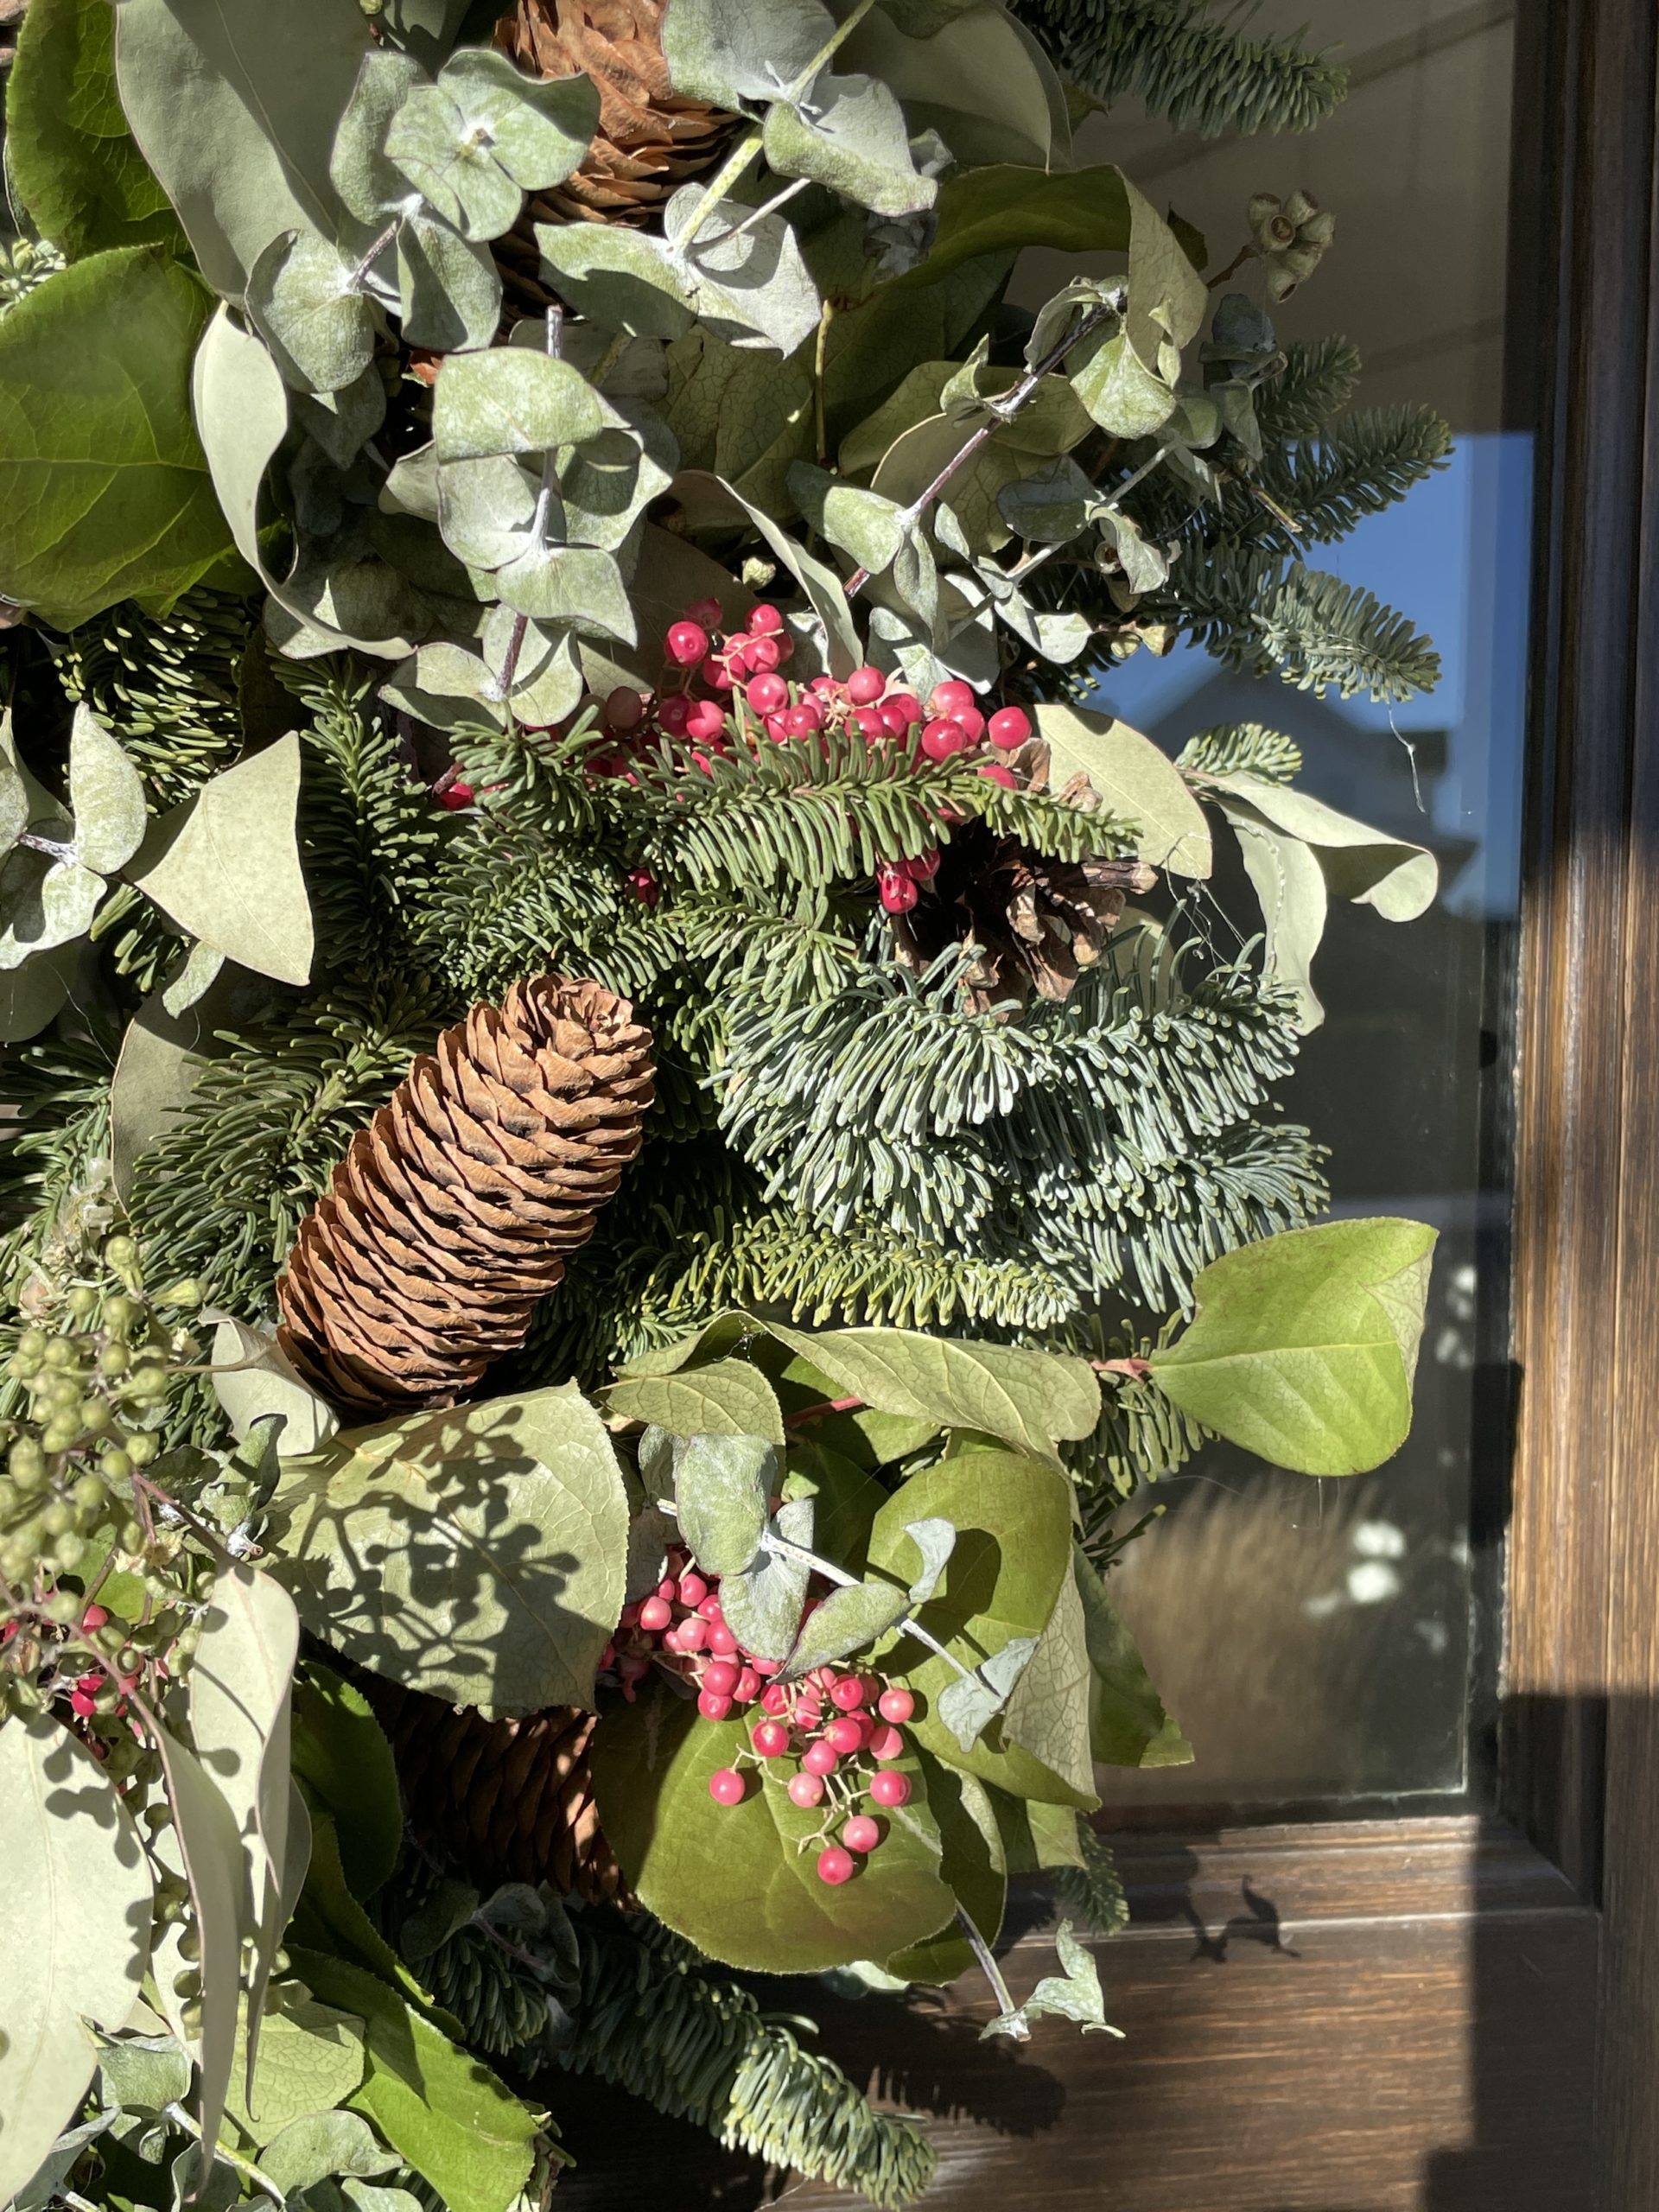 How to Welcome Mother Nature into Your Winter and Christmas Holiday Decor